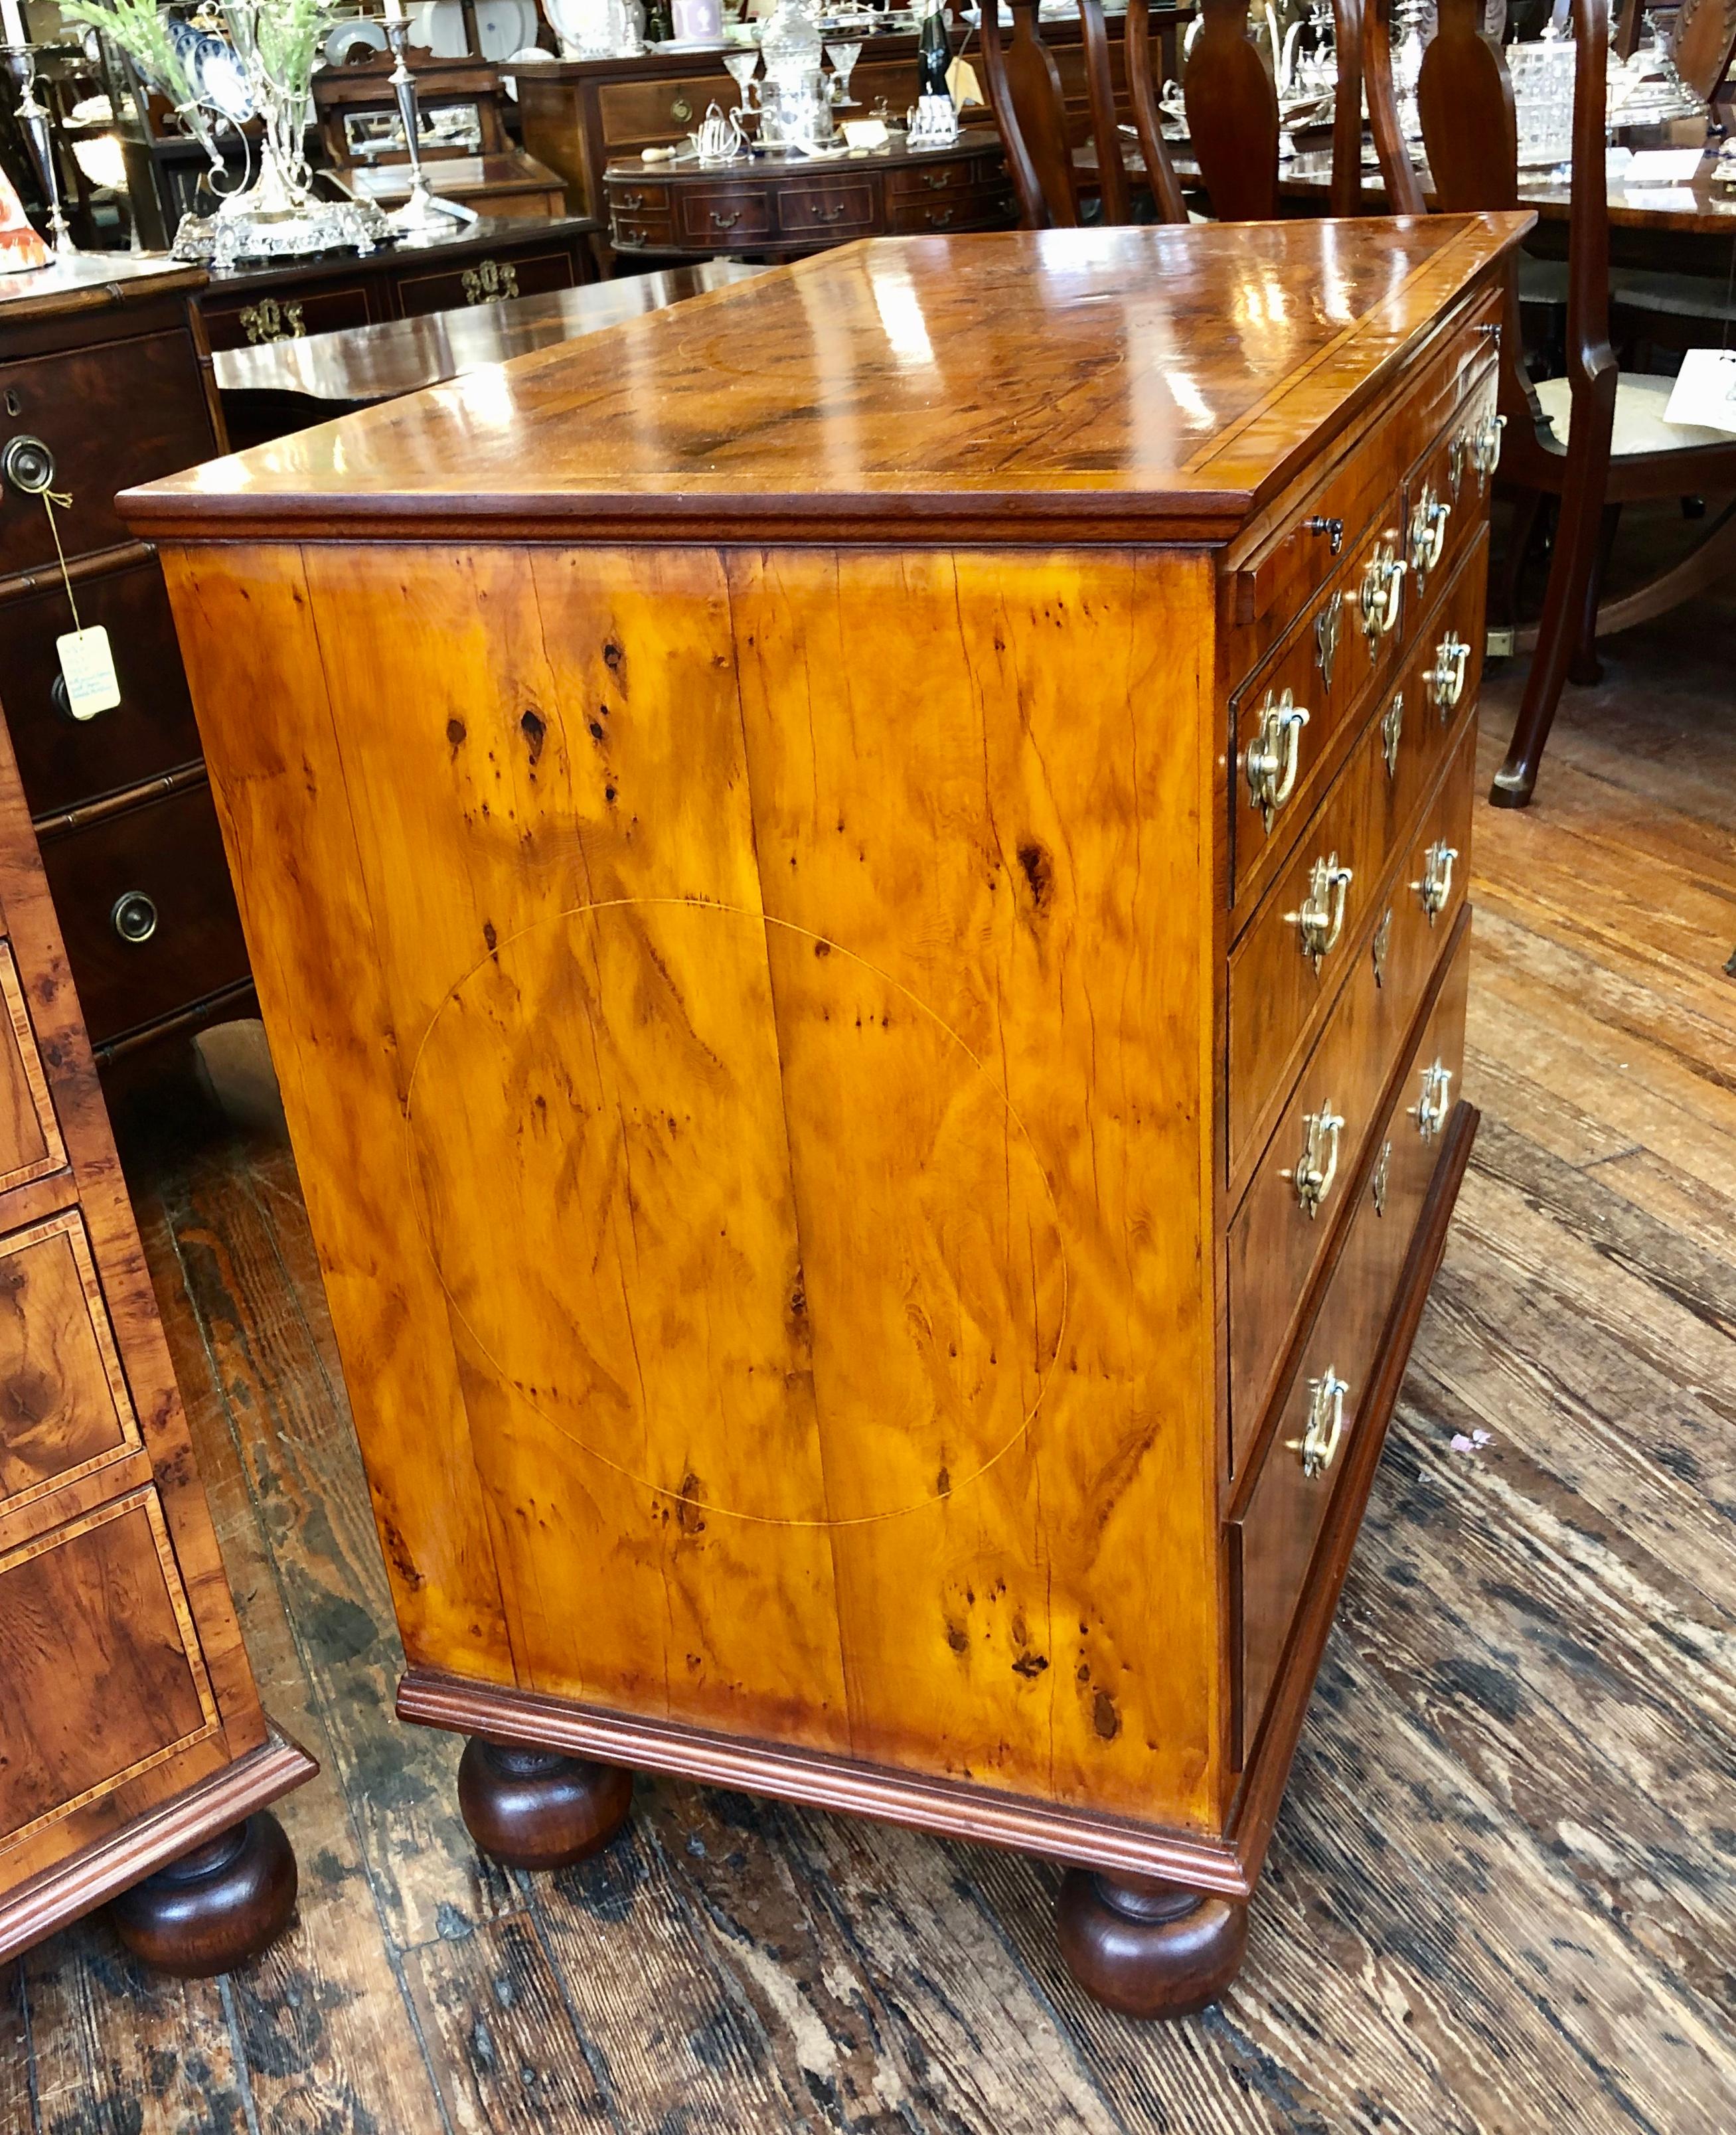 Pair of Extraordinary English Inlaid Yew Wood Bachelor's Chests with Slides 1